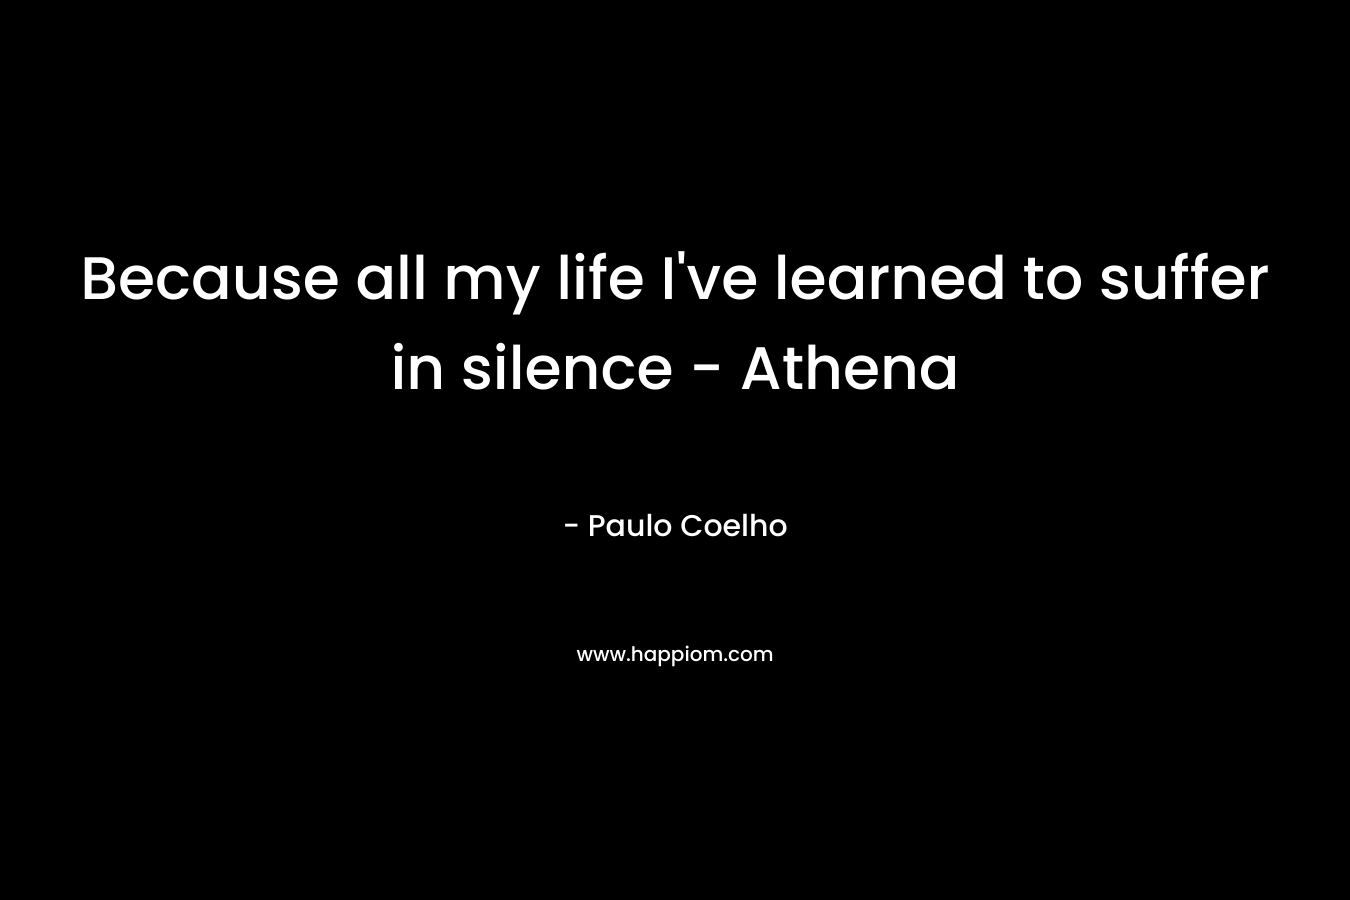 Because all my life I've learned to suffer in silence - Athena